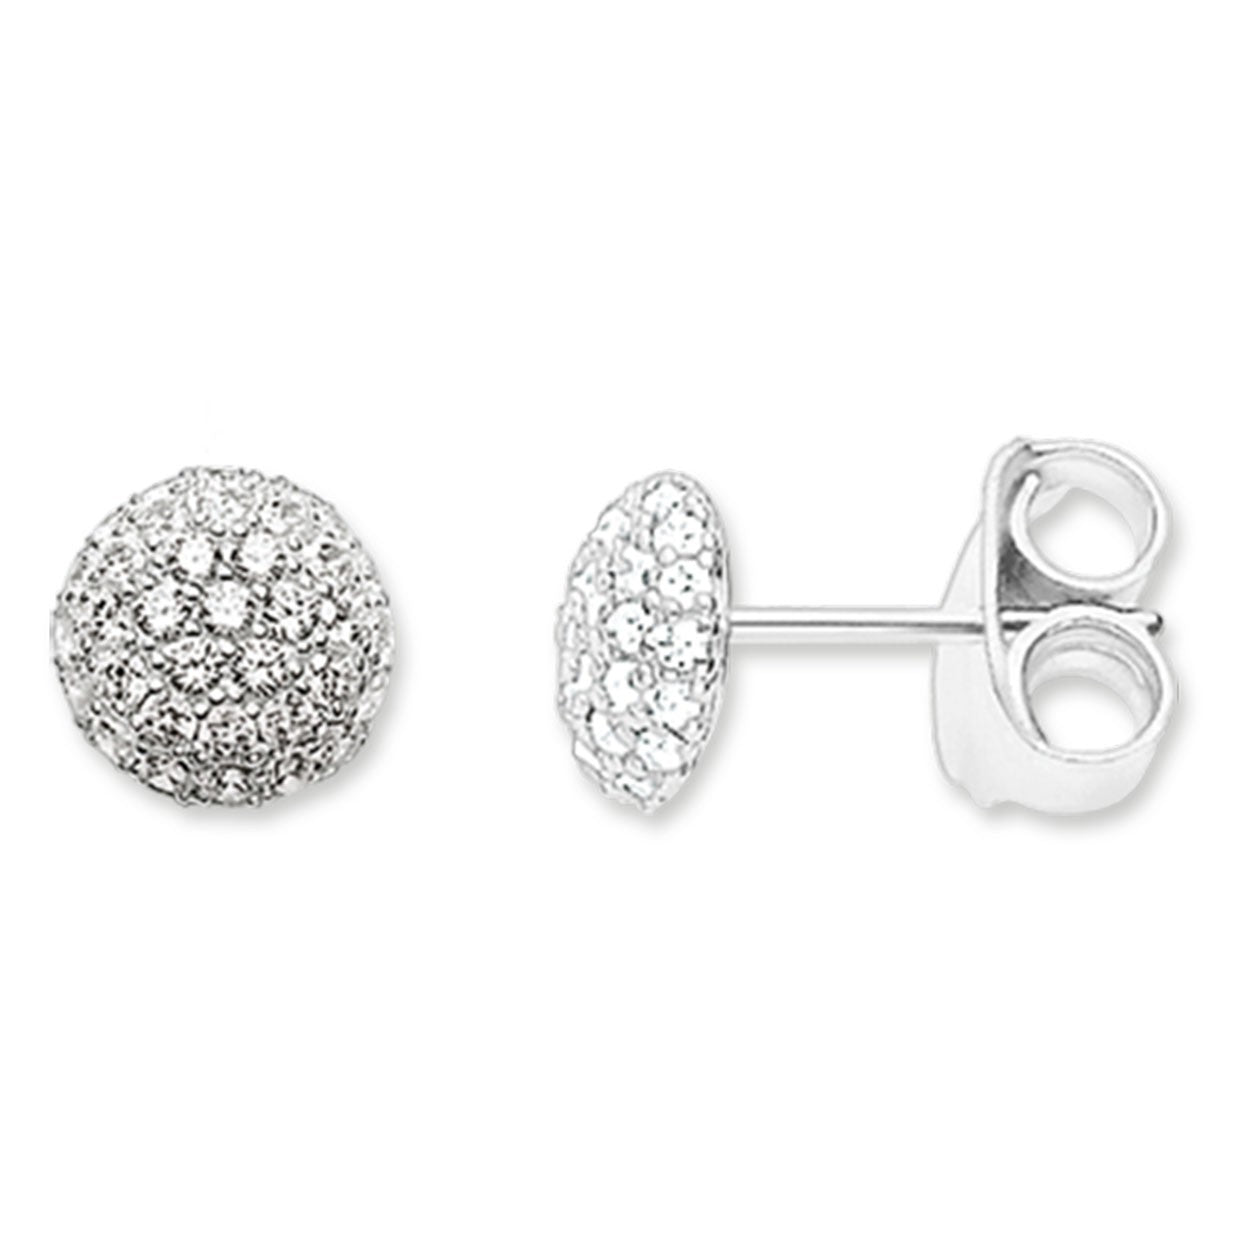 Thomas Sabo Silver Clear Cubic Zirconia Pave Dome Studs H1810-051-14